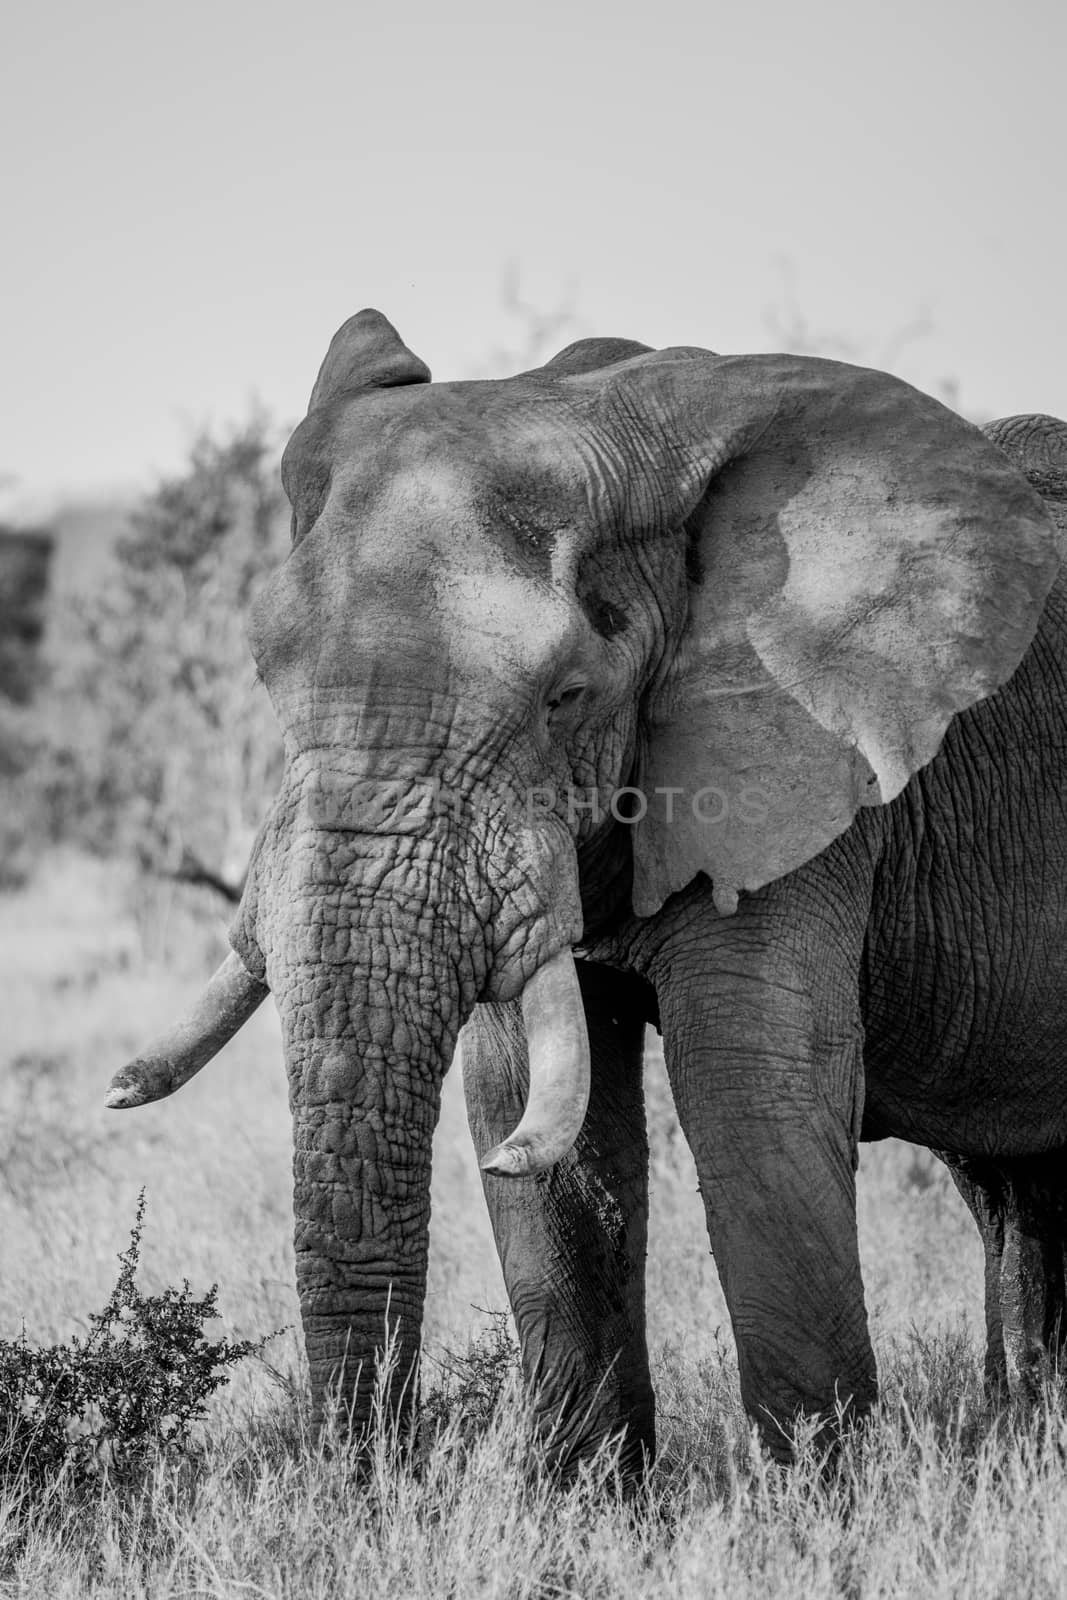 Elephant in black and white in the Kruger National Park, South Africa. by Simoneemanphotography